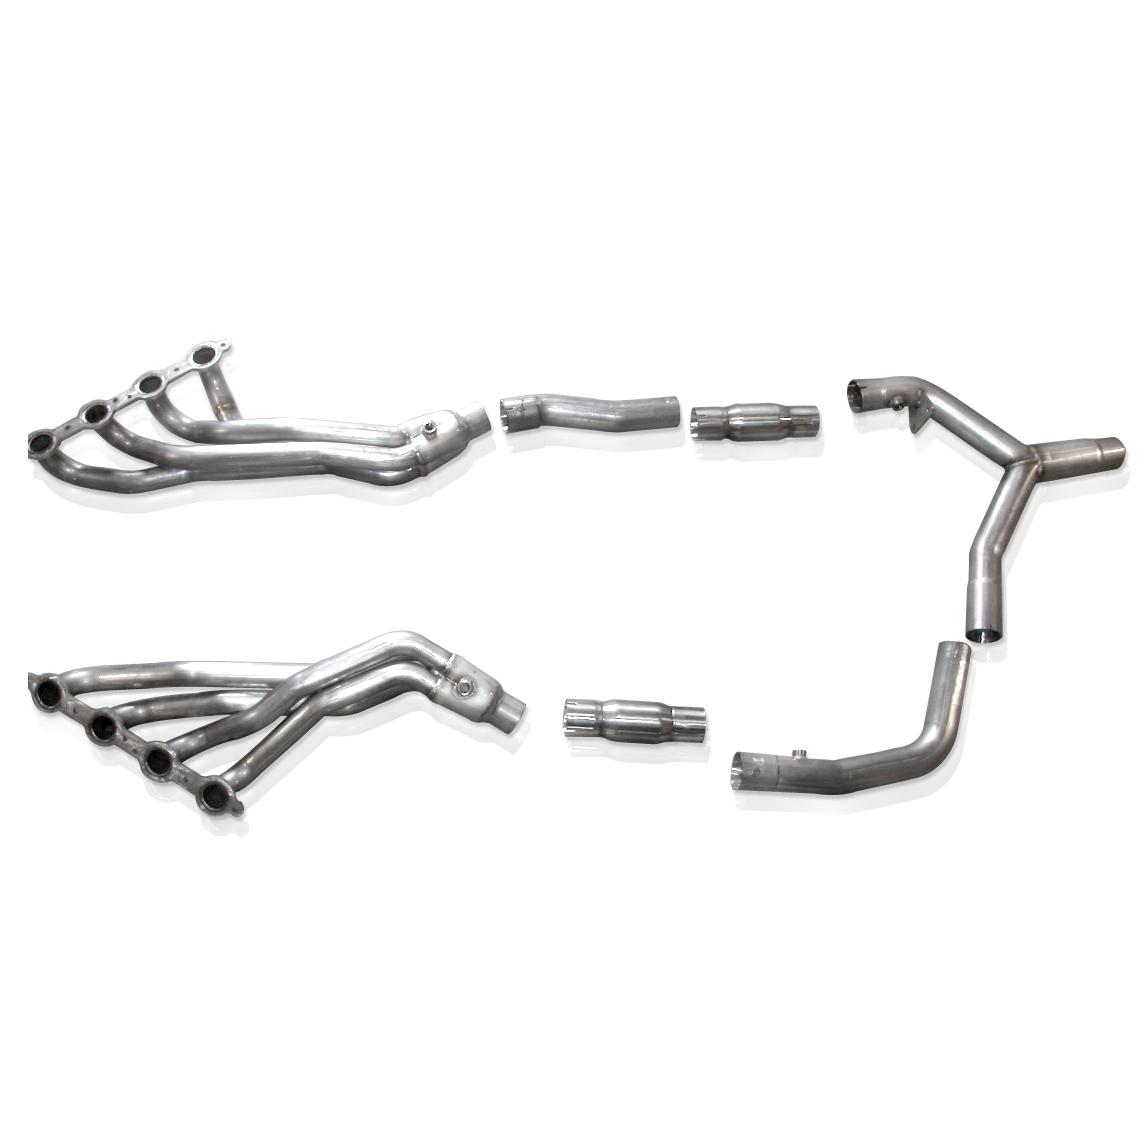 01-02 LS1 Fbody Stainless Works Long Tube Headers with High Flow 2.5" Catted Ypipe